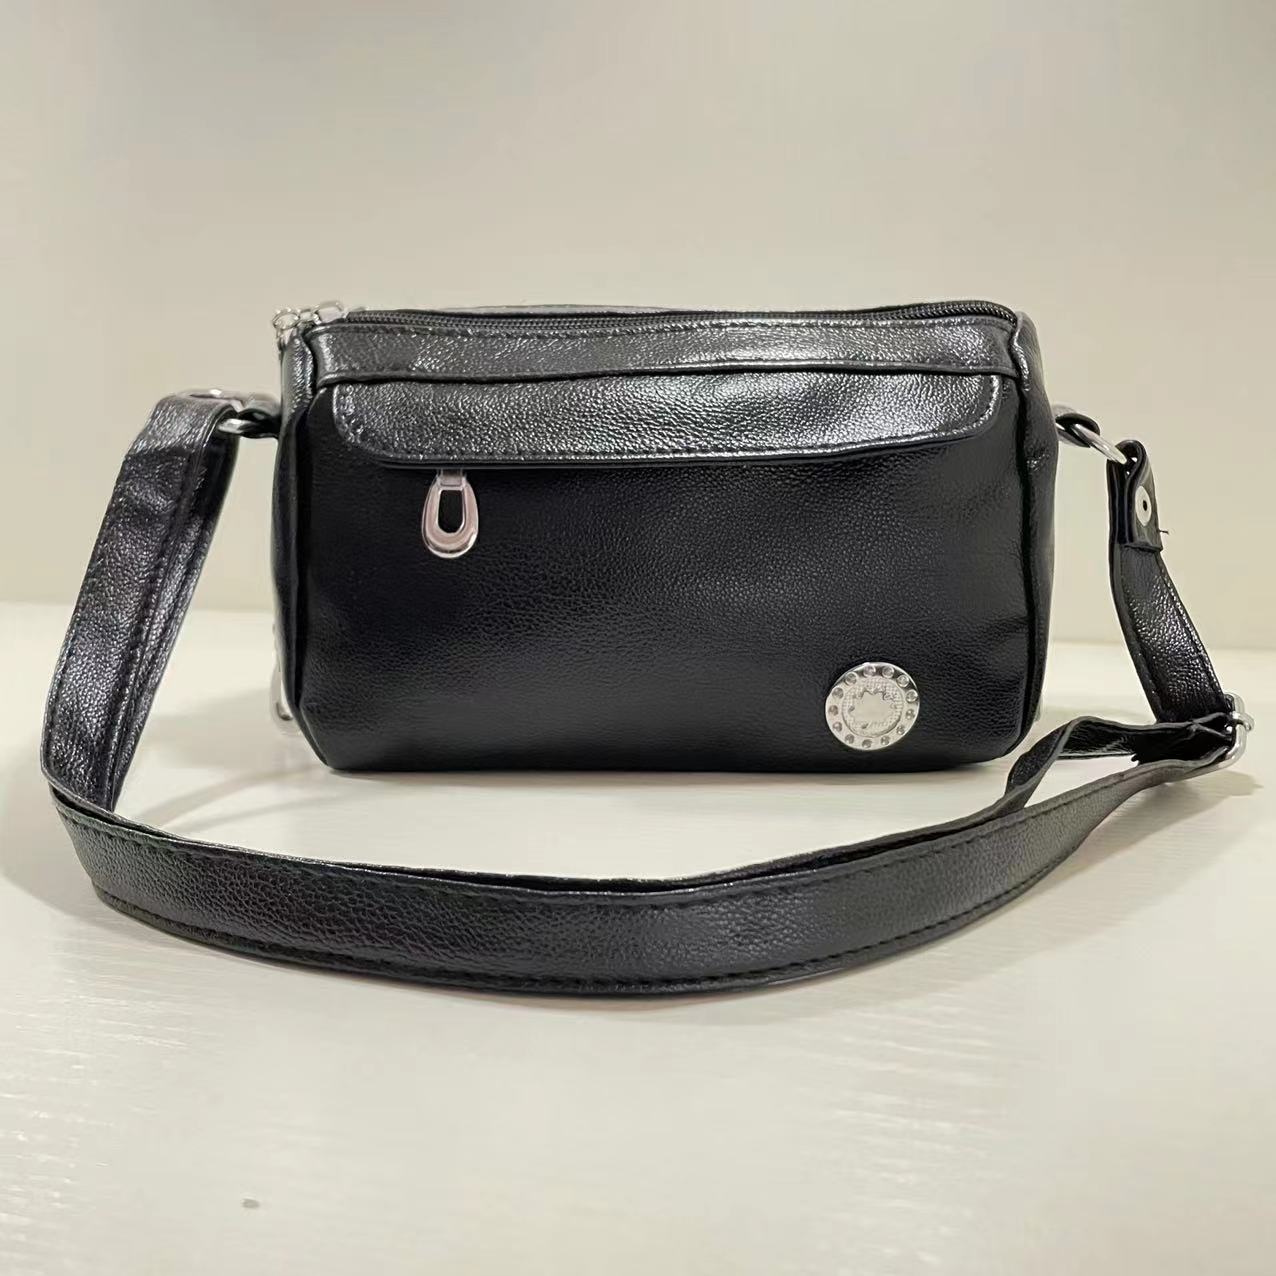 Simple Black Leather Crossbody Bag With Zipper 